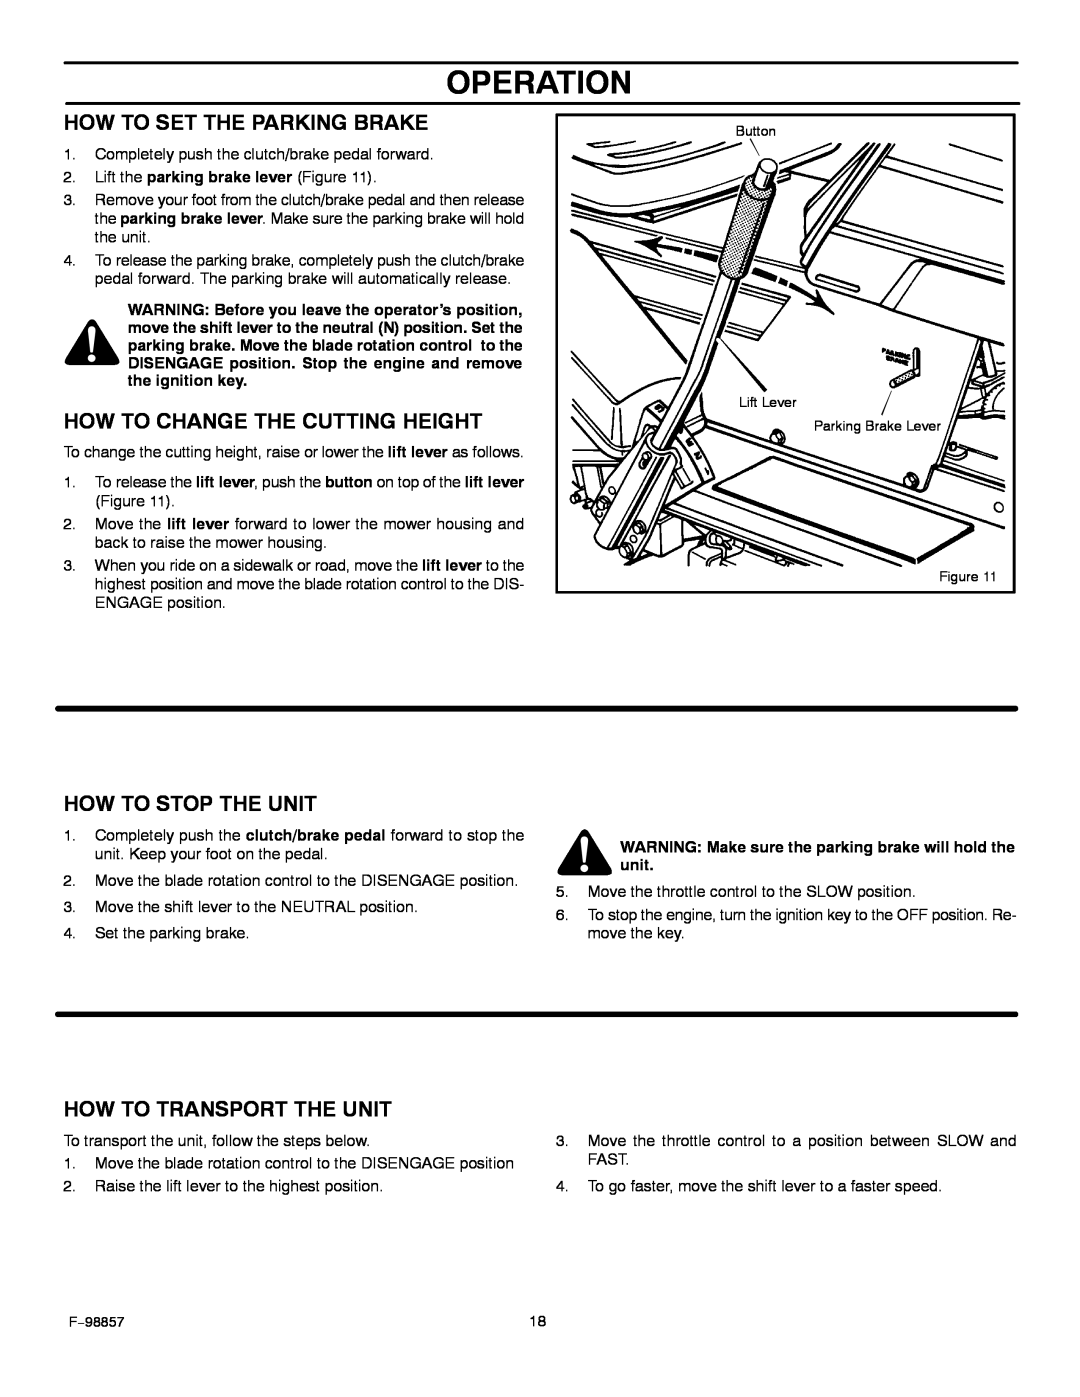 Hayter Mowers 30-Dec manual How To Set The Parking Brake, How To Change The Cutting Height, How To Stop The Unit, Operation 